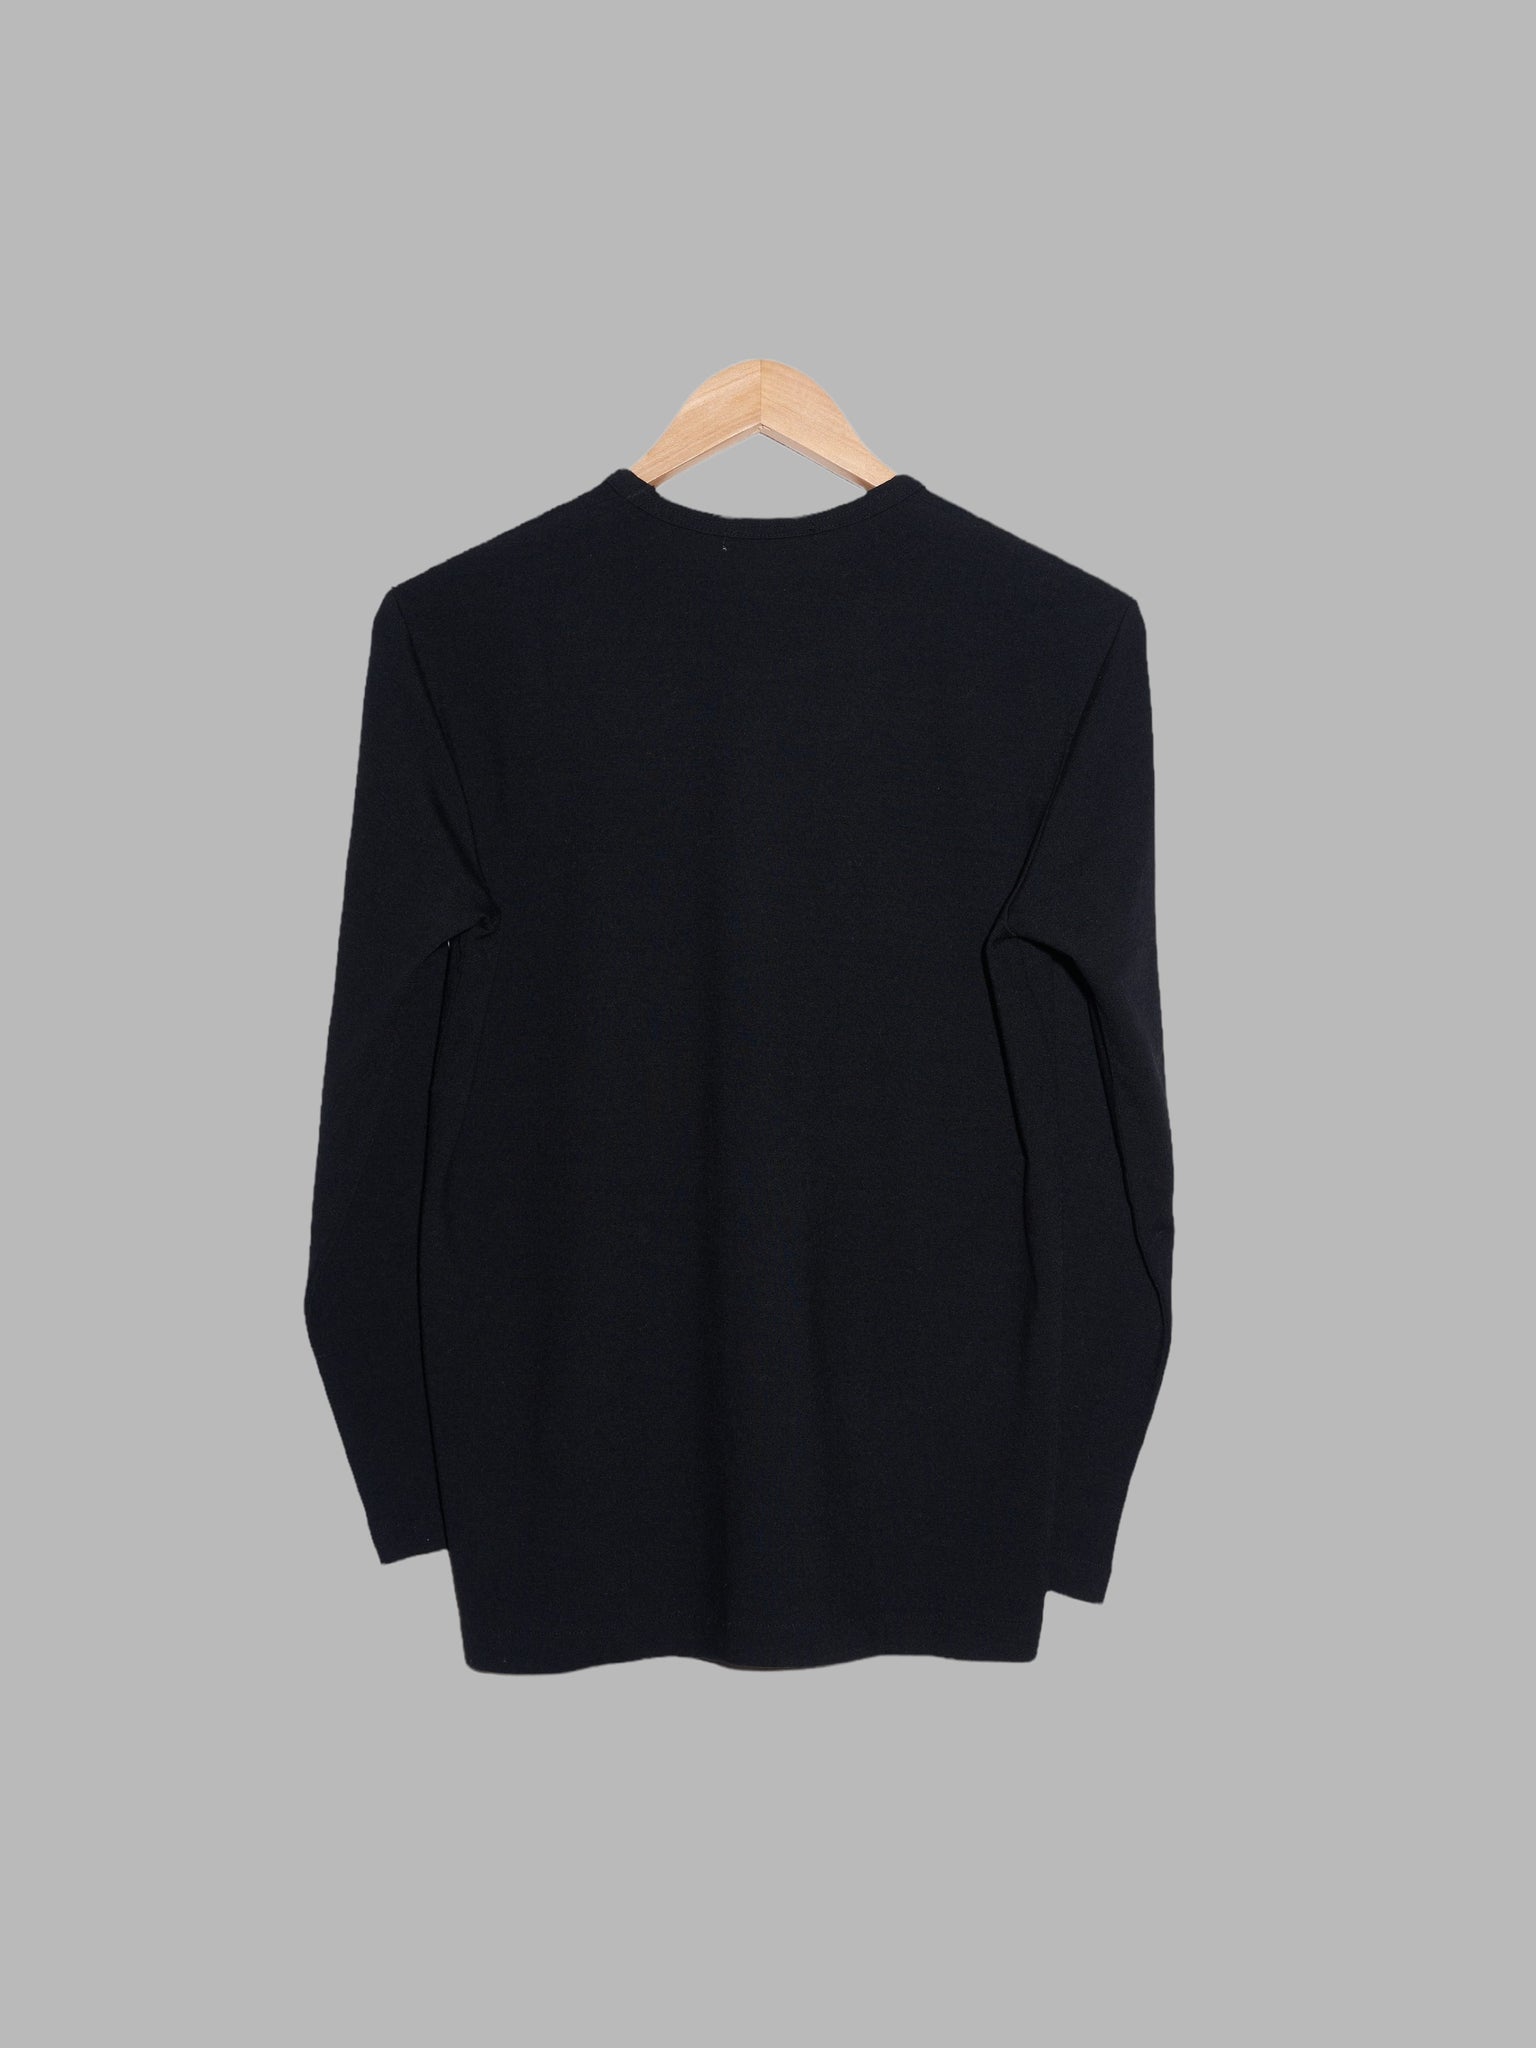 Comme des Garcons AW1989 black wool long sleeve cat top